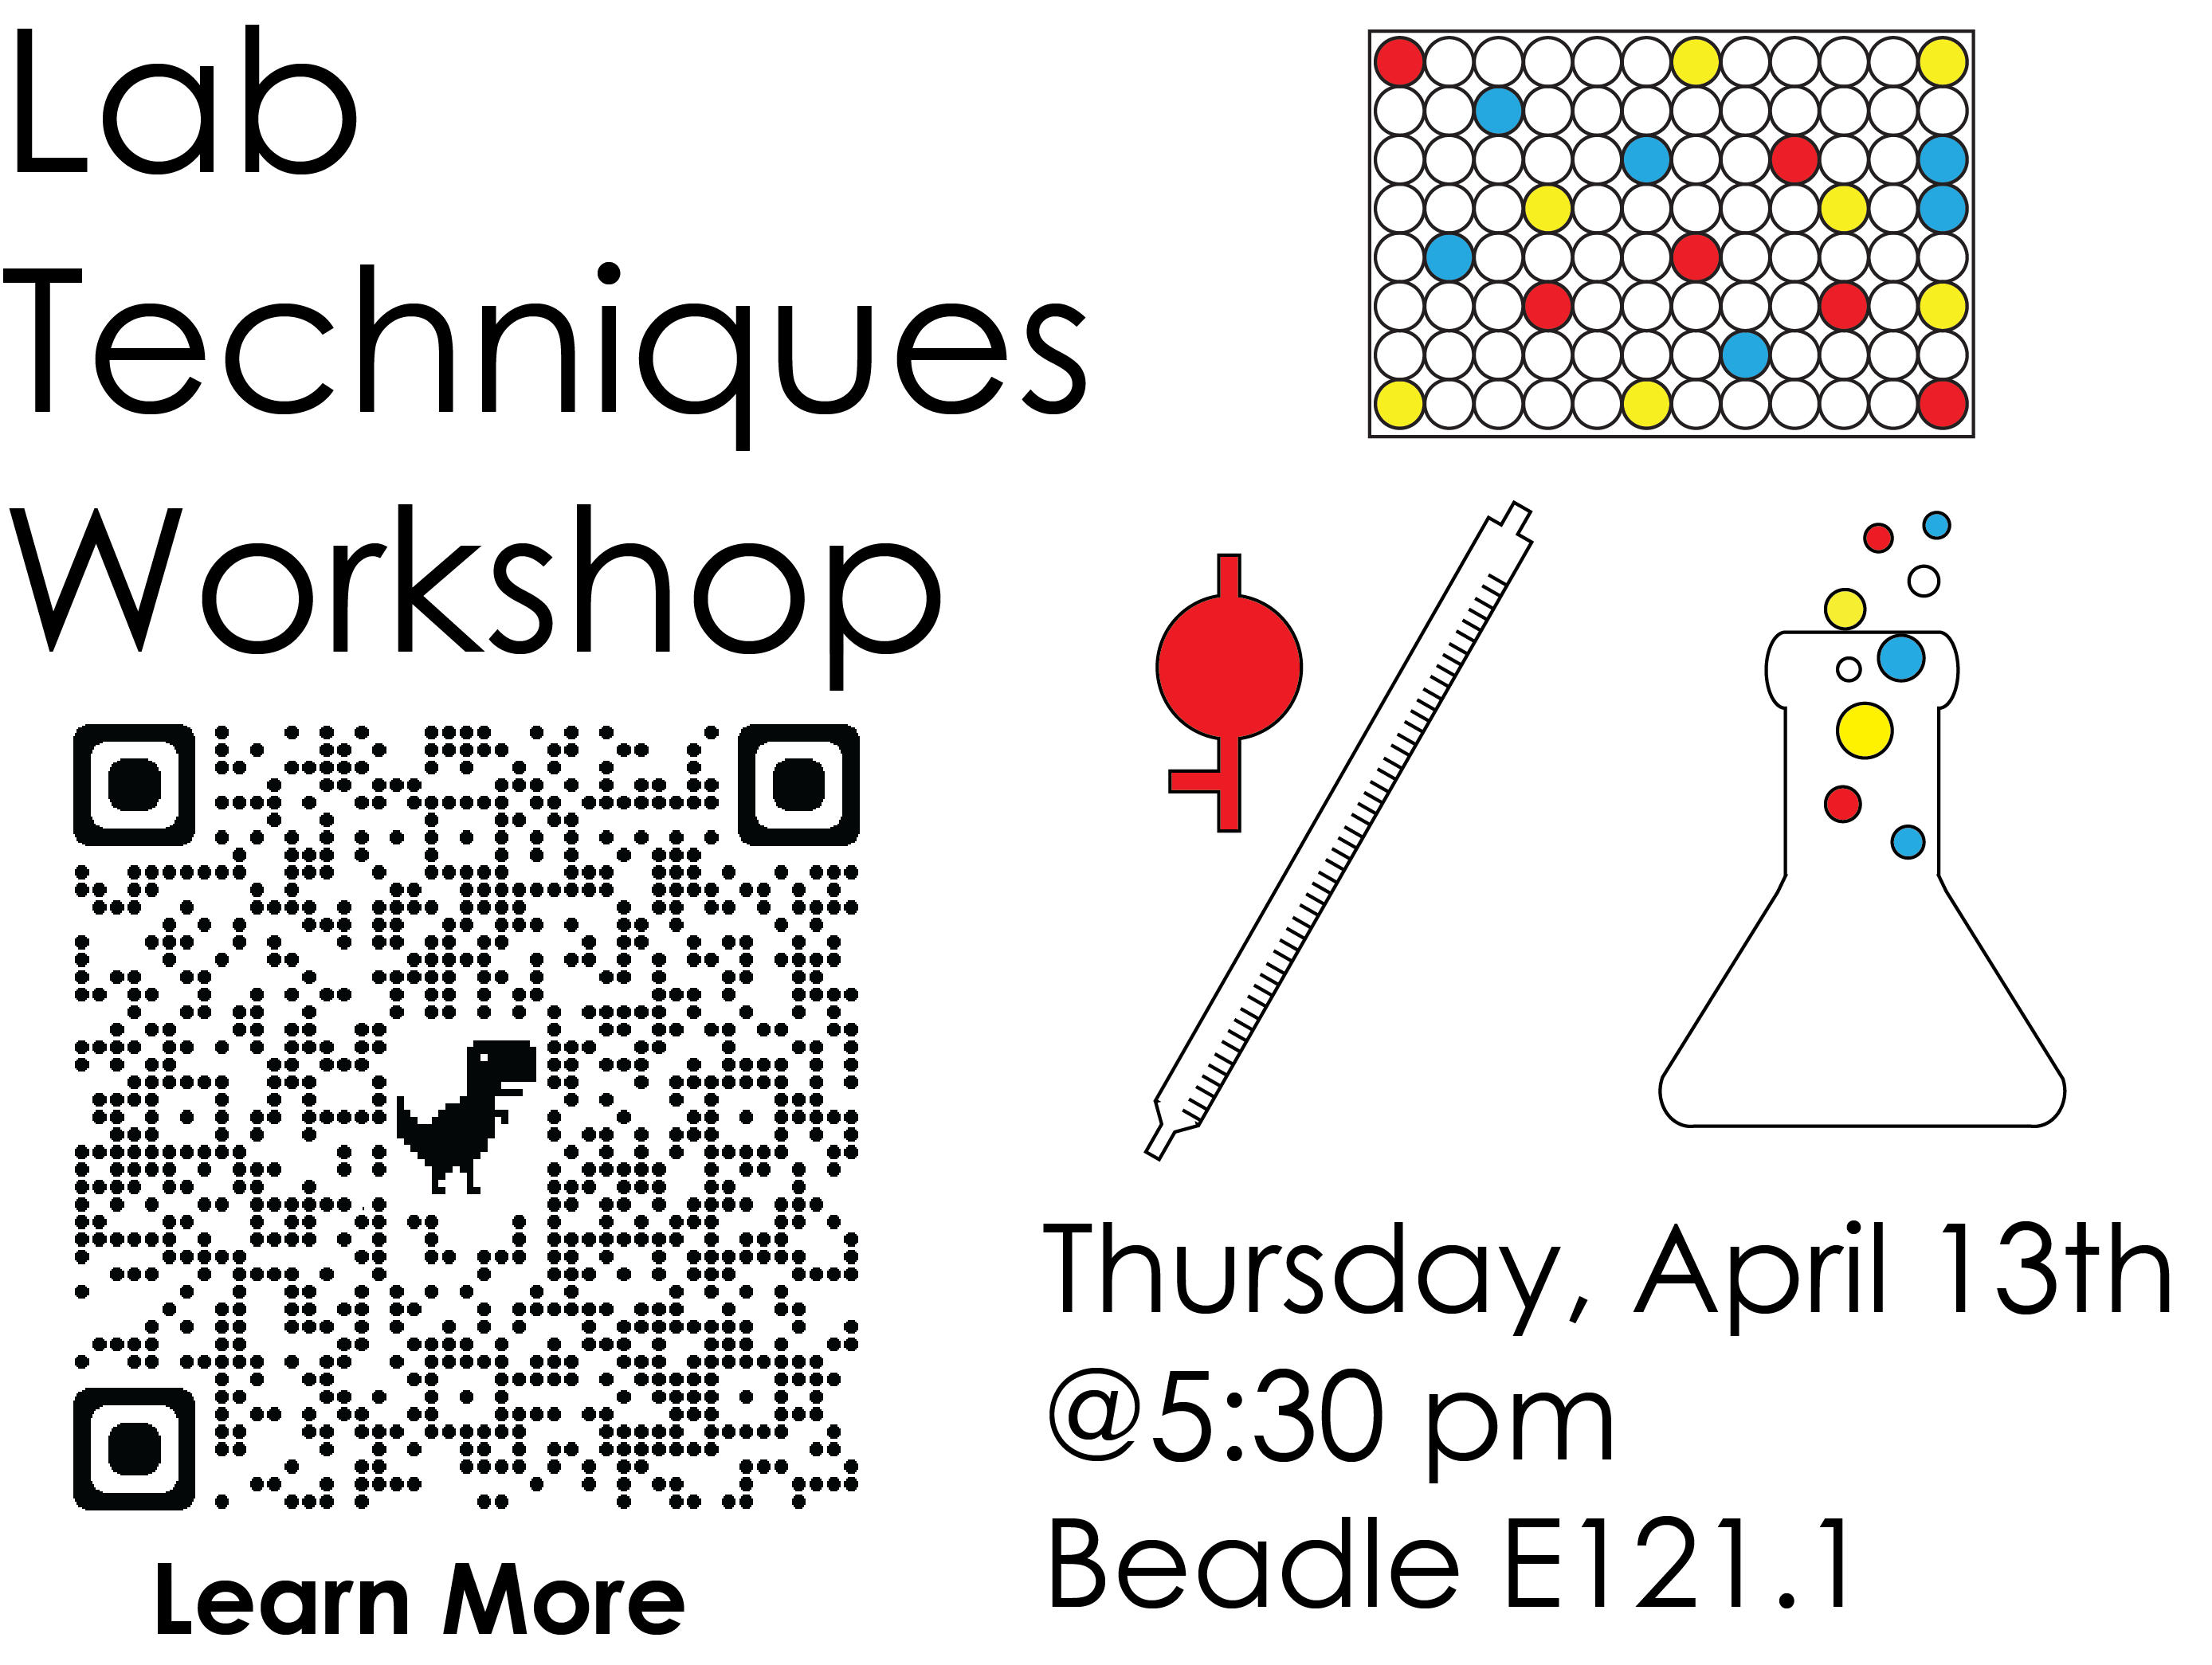 Lab Techniques Workshop log with a QR code for more information. The date and time of the event is Thursday April 13th at 5:30 pm in Beadle E121.1.